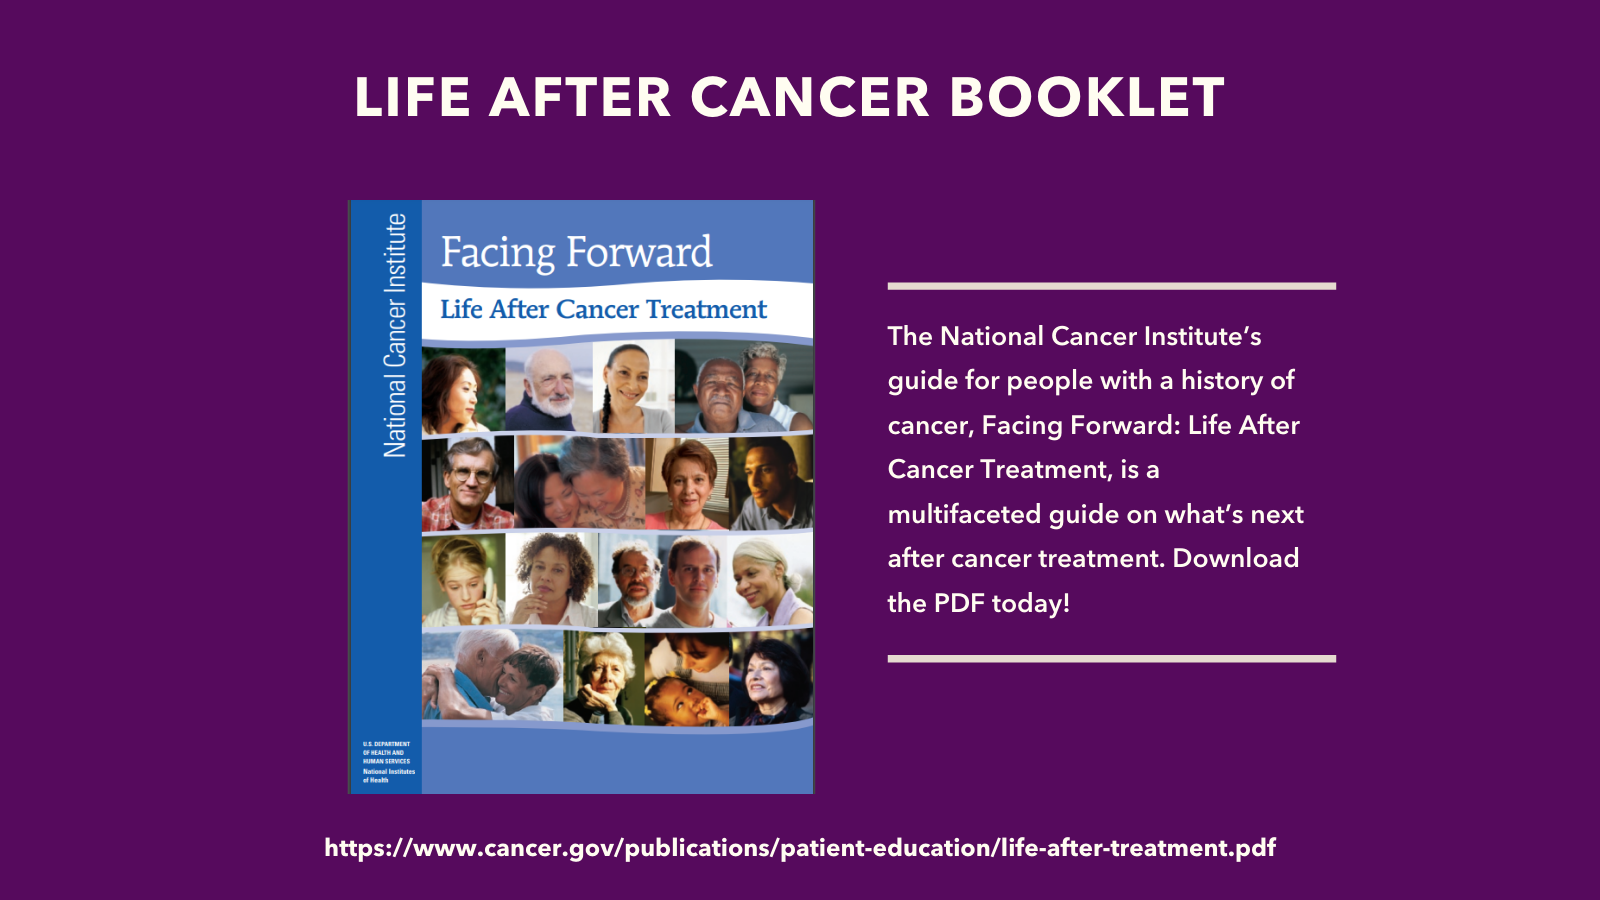 Image of Life After Cancer booklet on dark purple background. Text on the right reads: the National Cancer Institute's guide for people with a history of cancer, Facing Forward: Life after Cancer Treatment, is a multifaceted guide on what's next after cancer treatment. Download the PDF today! 